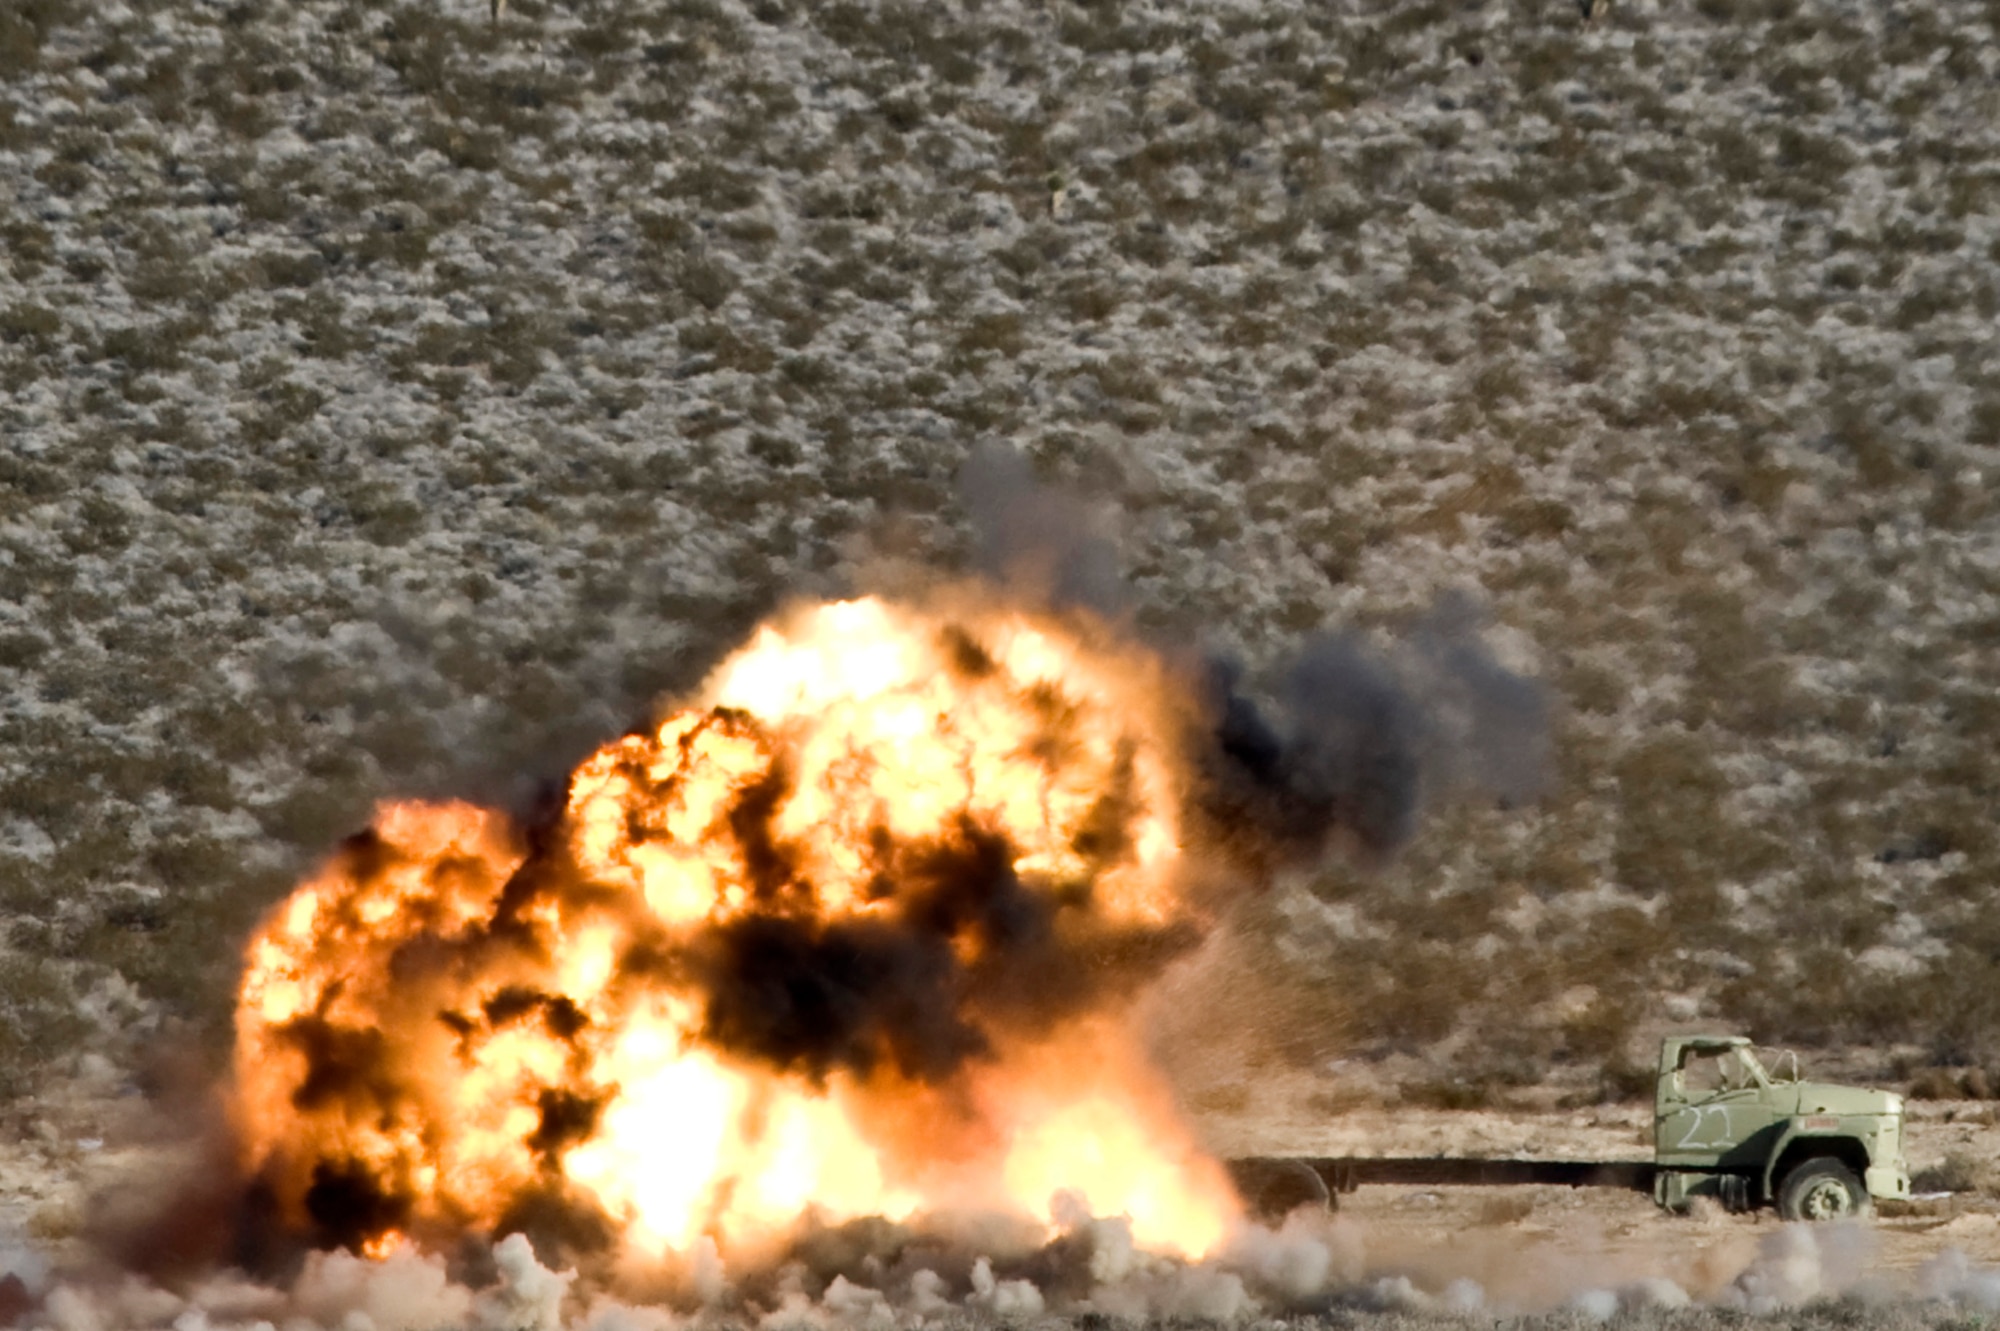 An AGM-114 Hellfire air-to-surface missile explodes on a target during a Handheld Laser Marker Tactics Development and Evaluation project Dec. 12, 2013, at the Nevada Test and Training Range, Nev. The LA-10u/PEQ handheld laser marker sends out a pulse repetition frequency code which is synchronized with the munition and guides it to an intended target. (U.S. Air Force photo by Senior Airman Matthew Lancaster)